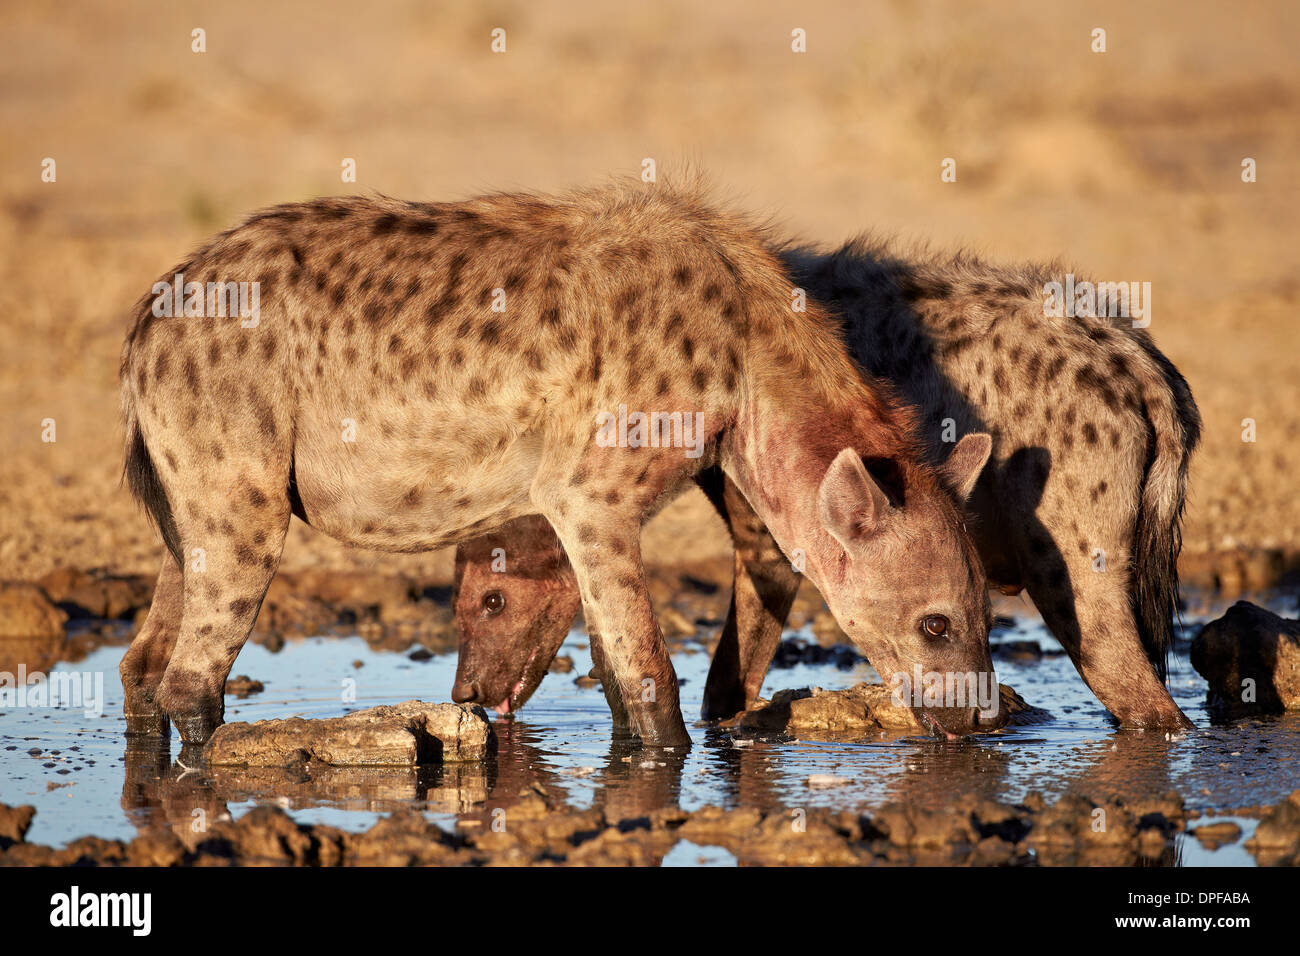 Two spotted hyena (spotted hyaena) (Crocuta crocuta) drinking, Kgalagadi Transfrontier Park, South Africa Stock Photo